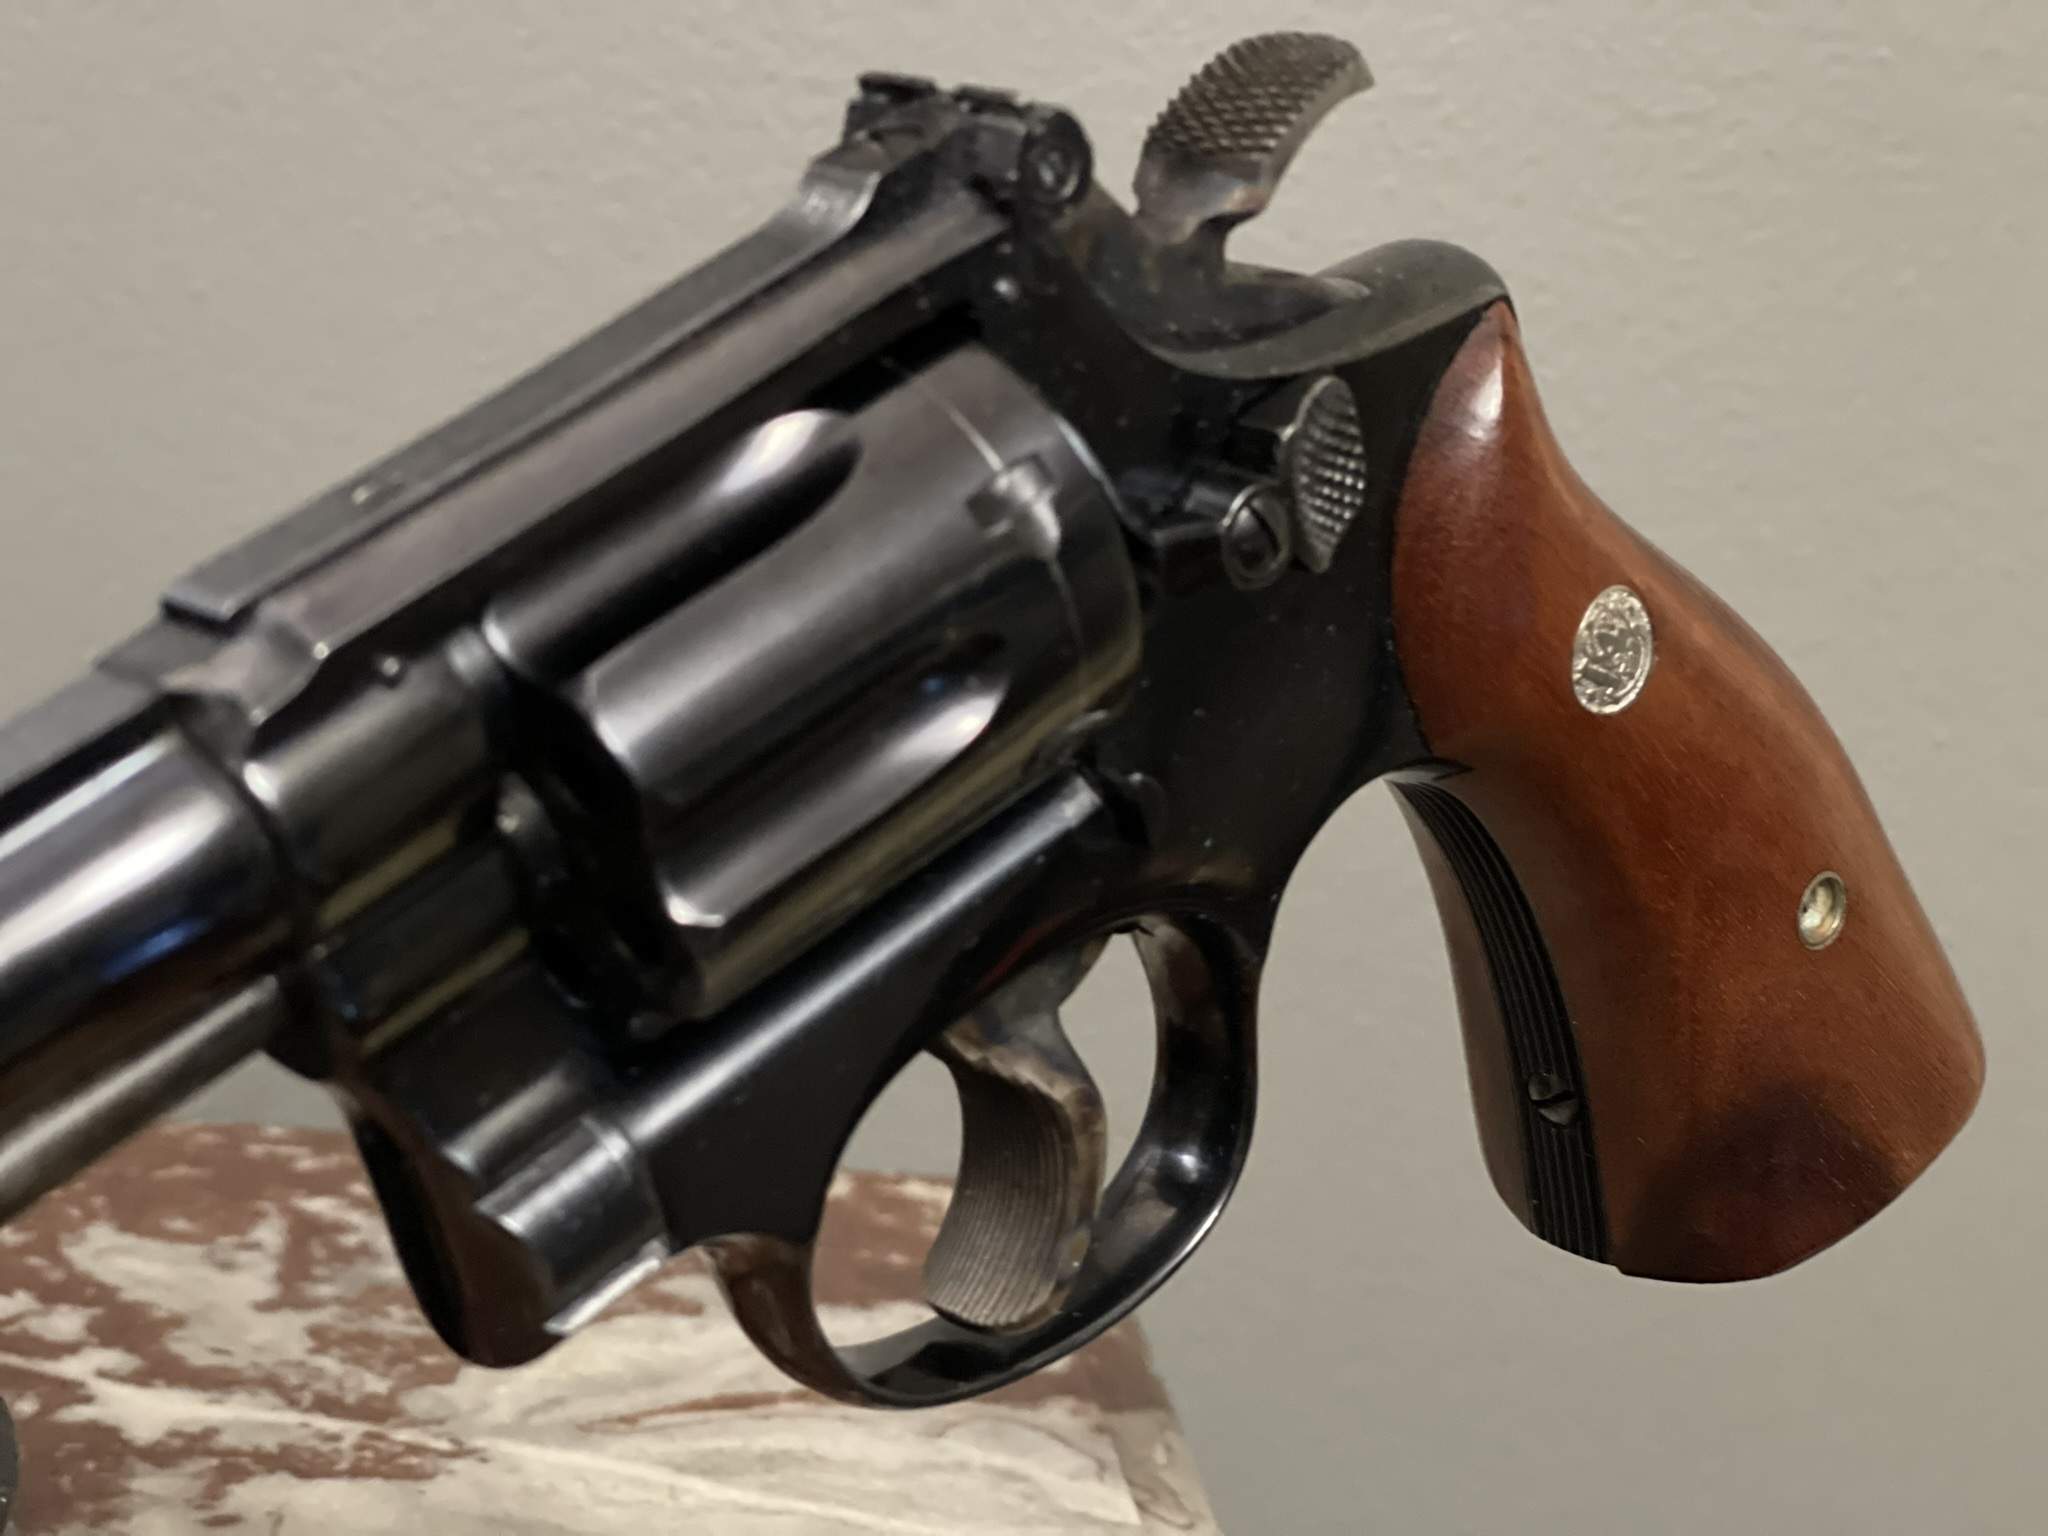 Smith and Wesson K-22 cylinder, target trigger and target hammer